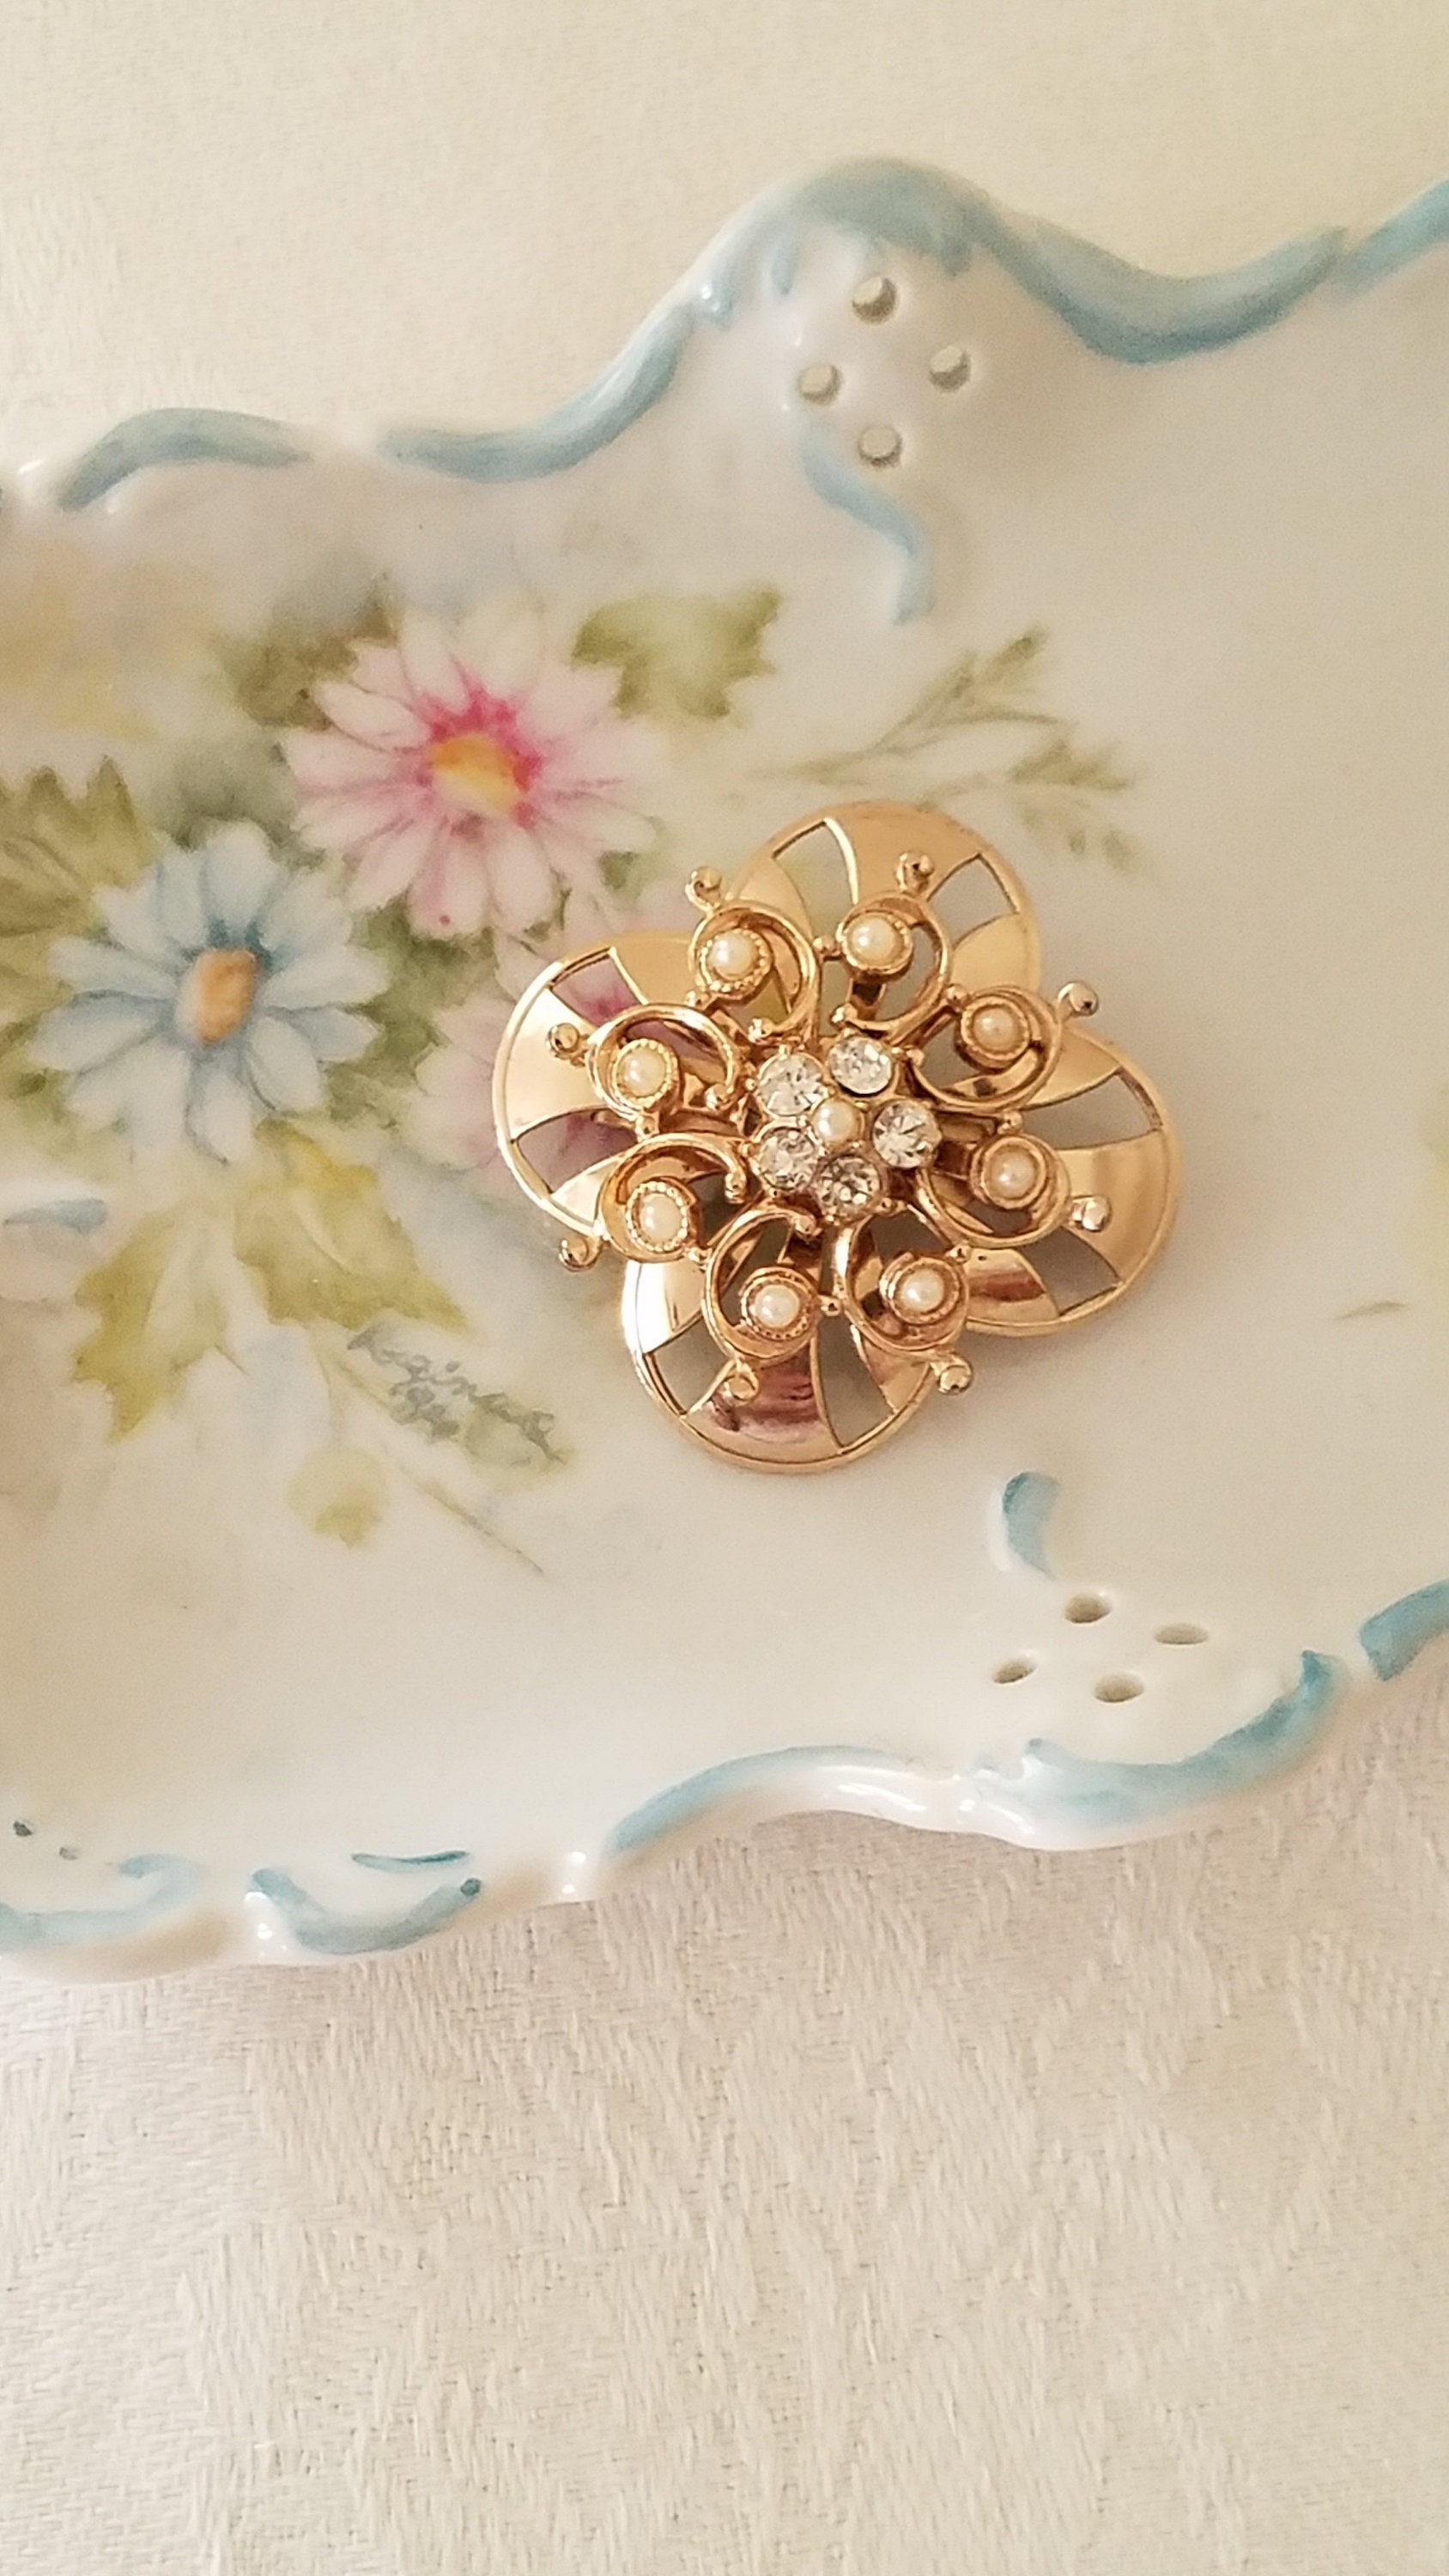 Vintage Gold-tone Rhinestone and Faux Pearls Brooch Pin 